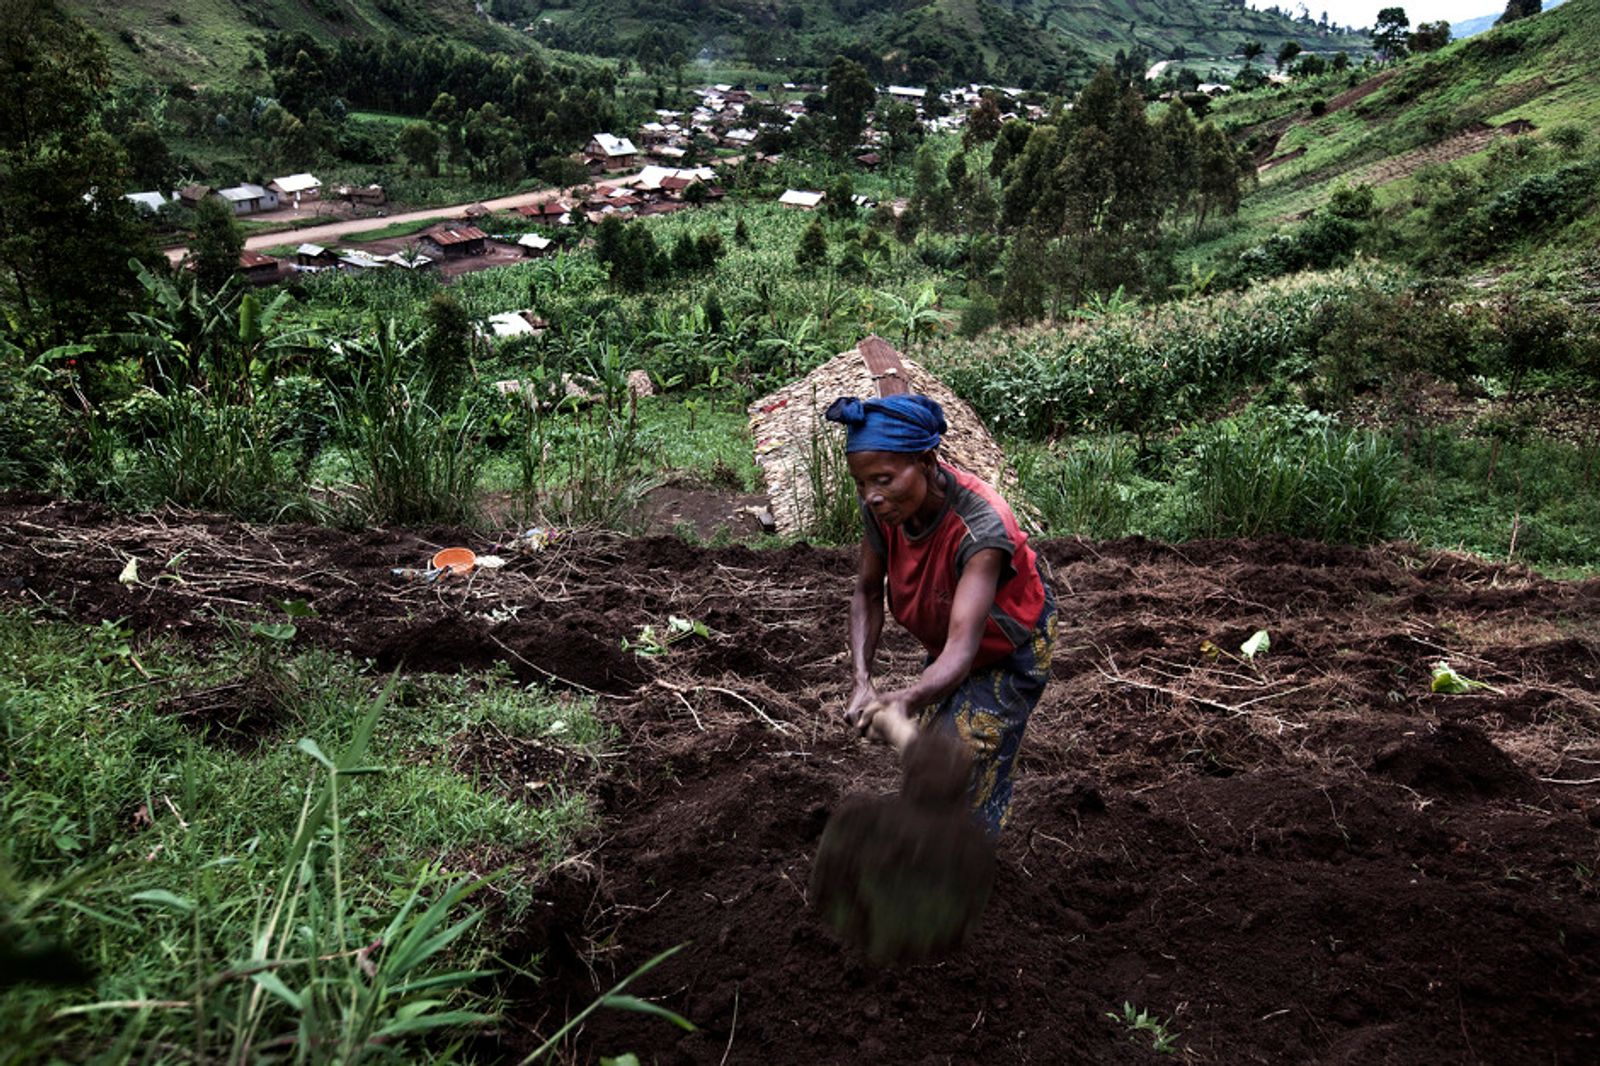 © Annibale Greco - A woman works in the fields of Buganga wih the village in the background, South Kivu province, DRC, 10 November 2011.